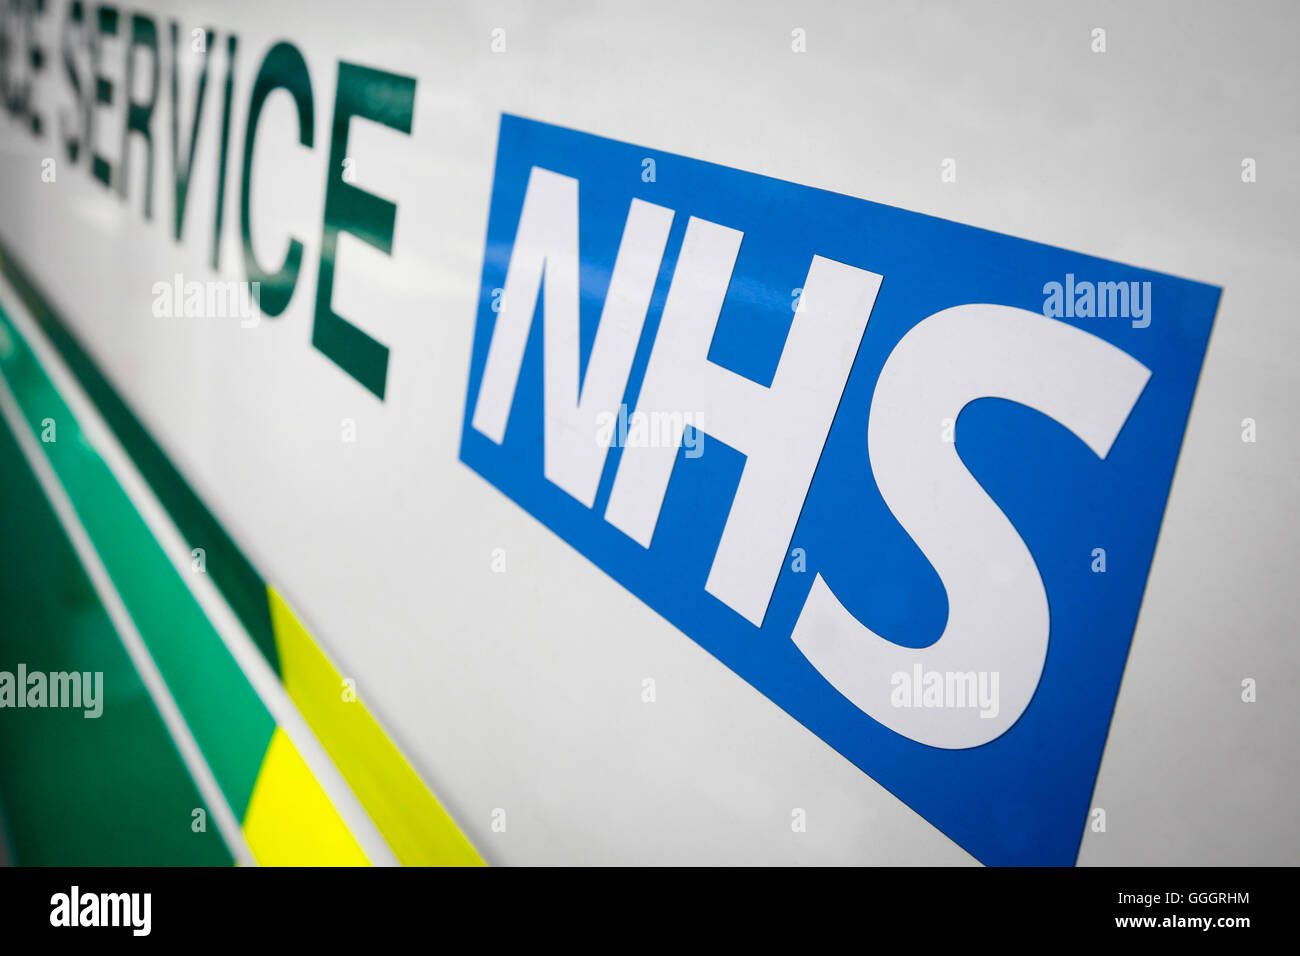 NHS sign logo on the side of an ambulance Stock Photo